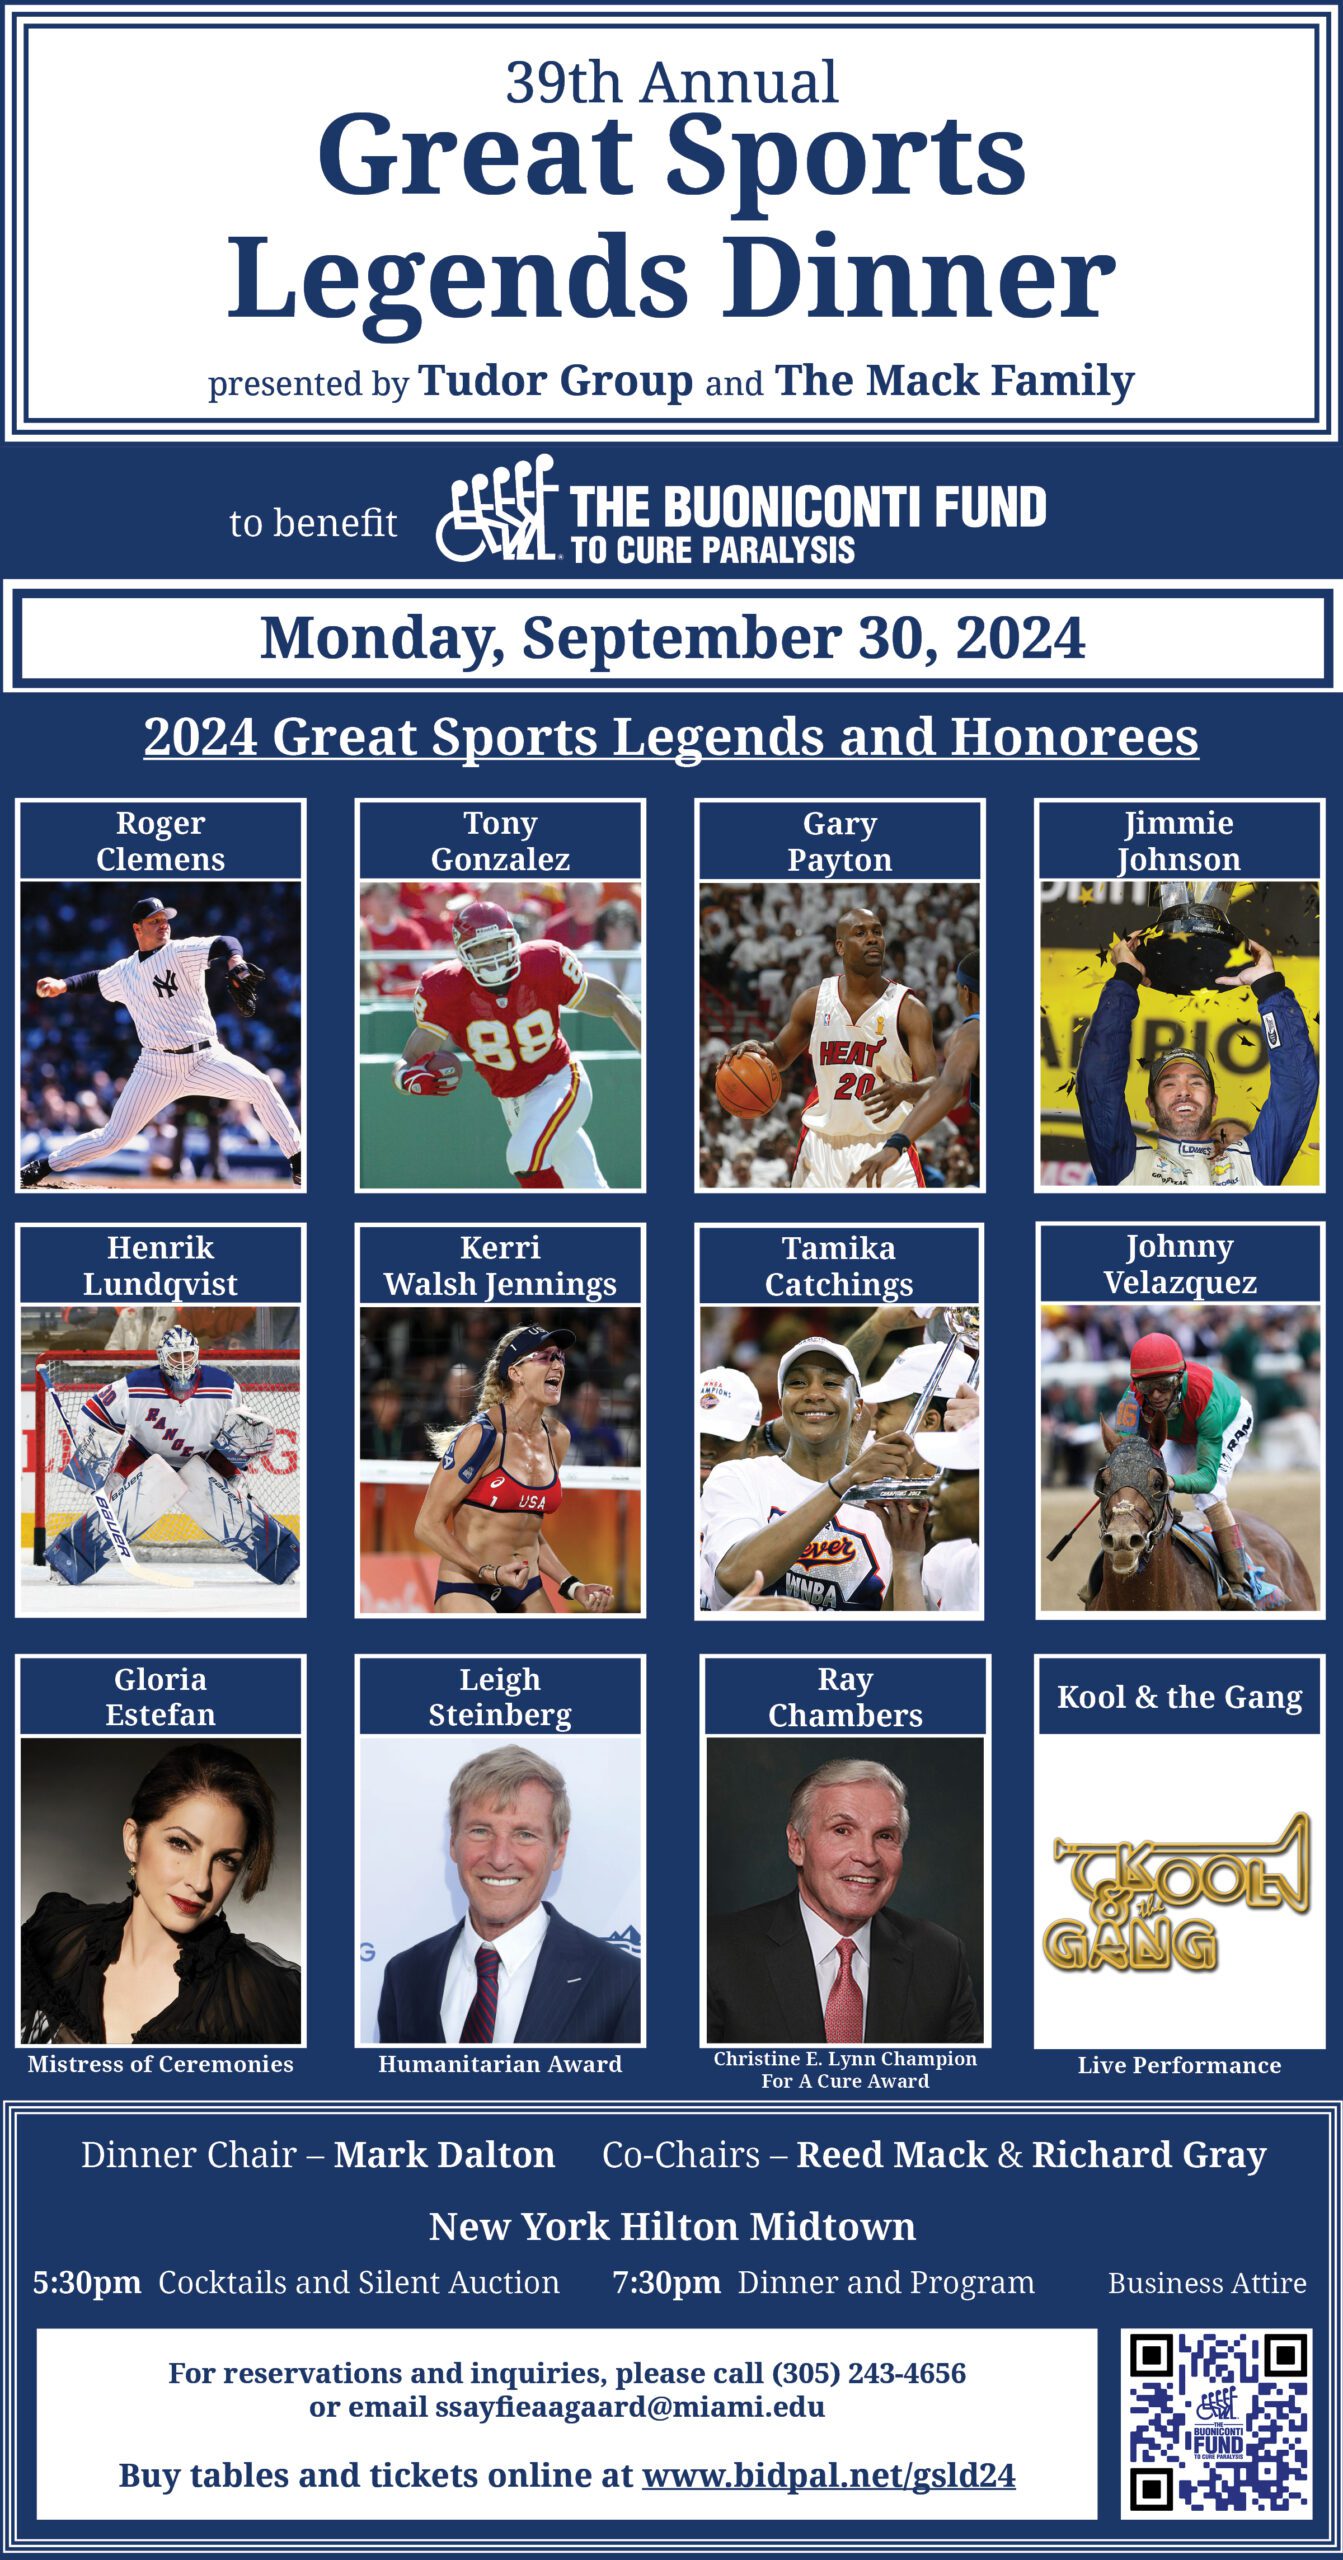 39th Annual Great Sports Legends Dinner